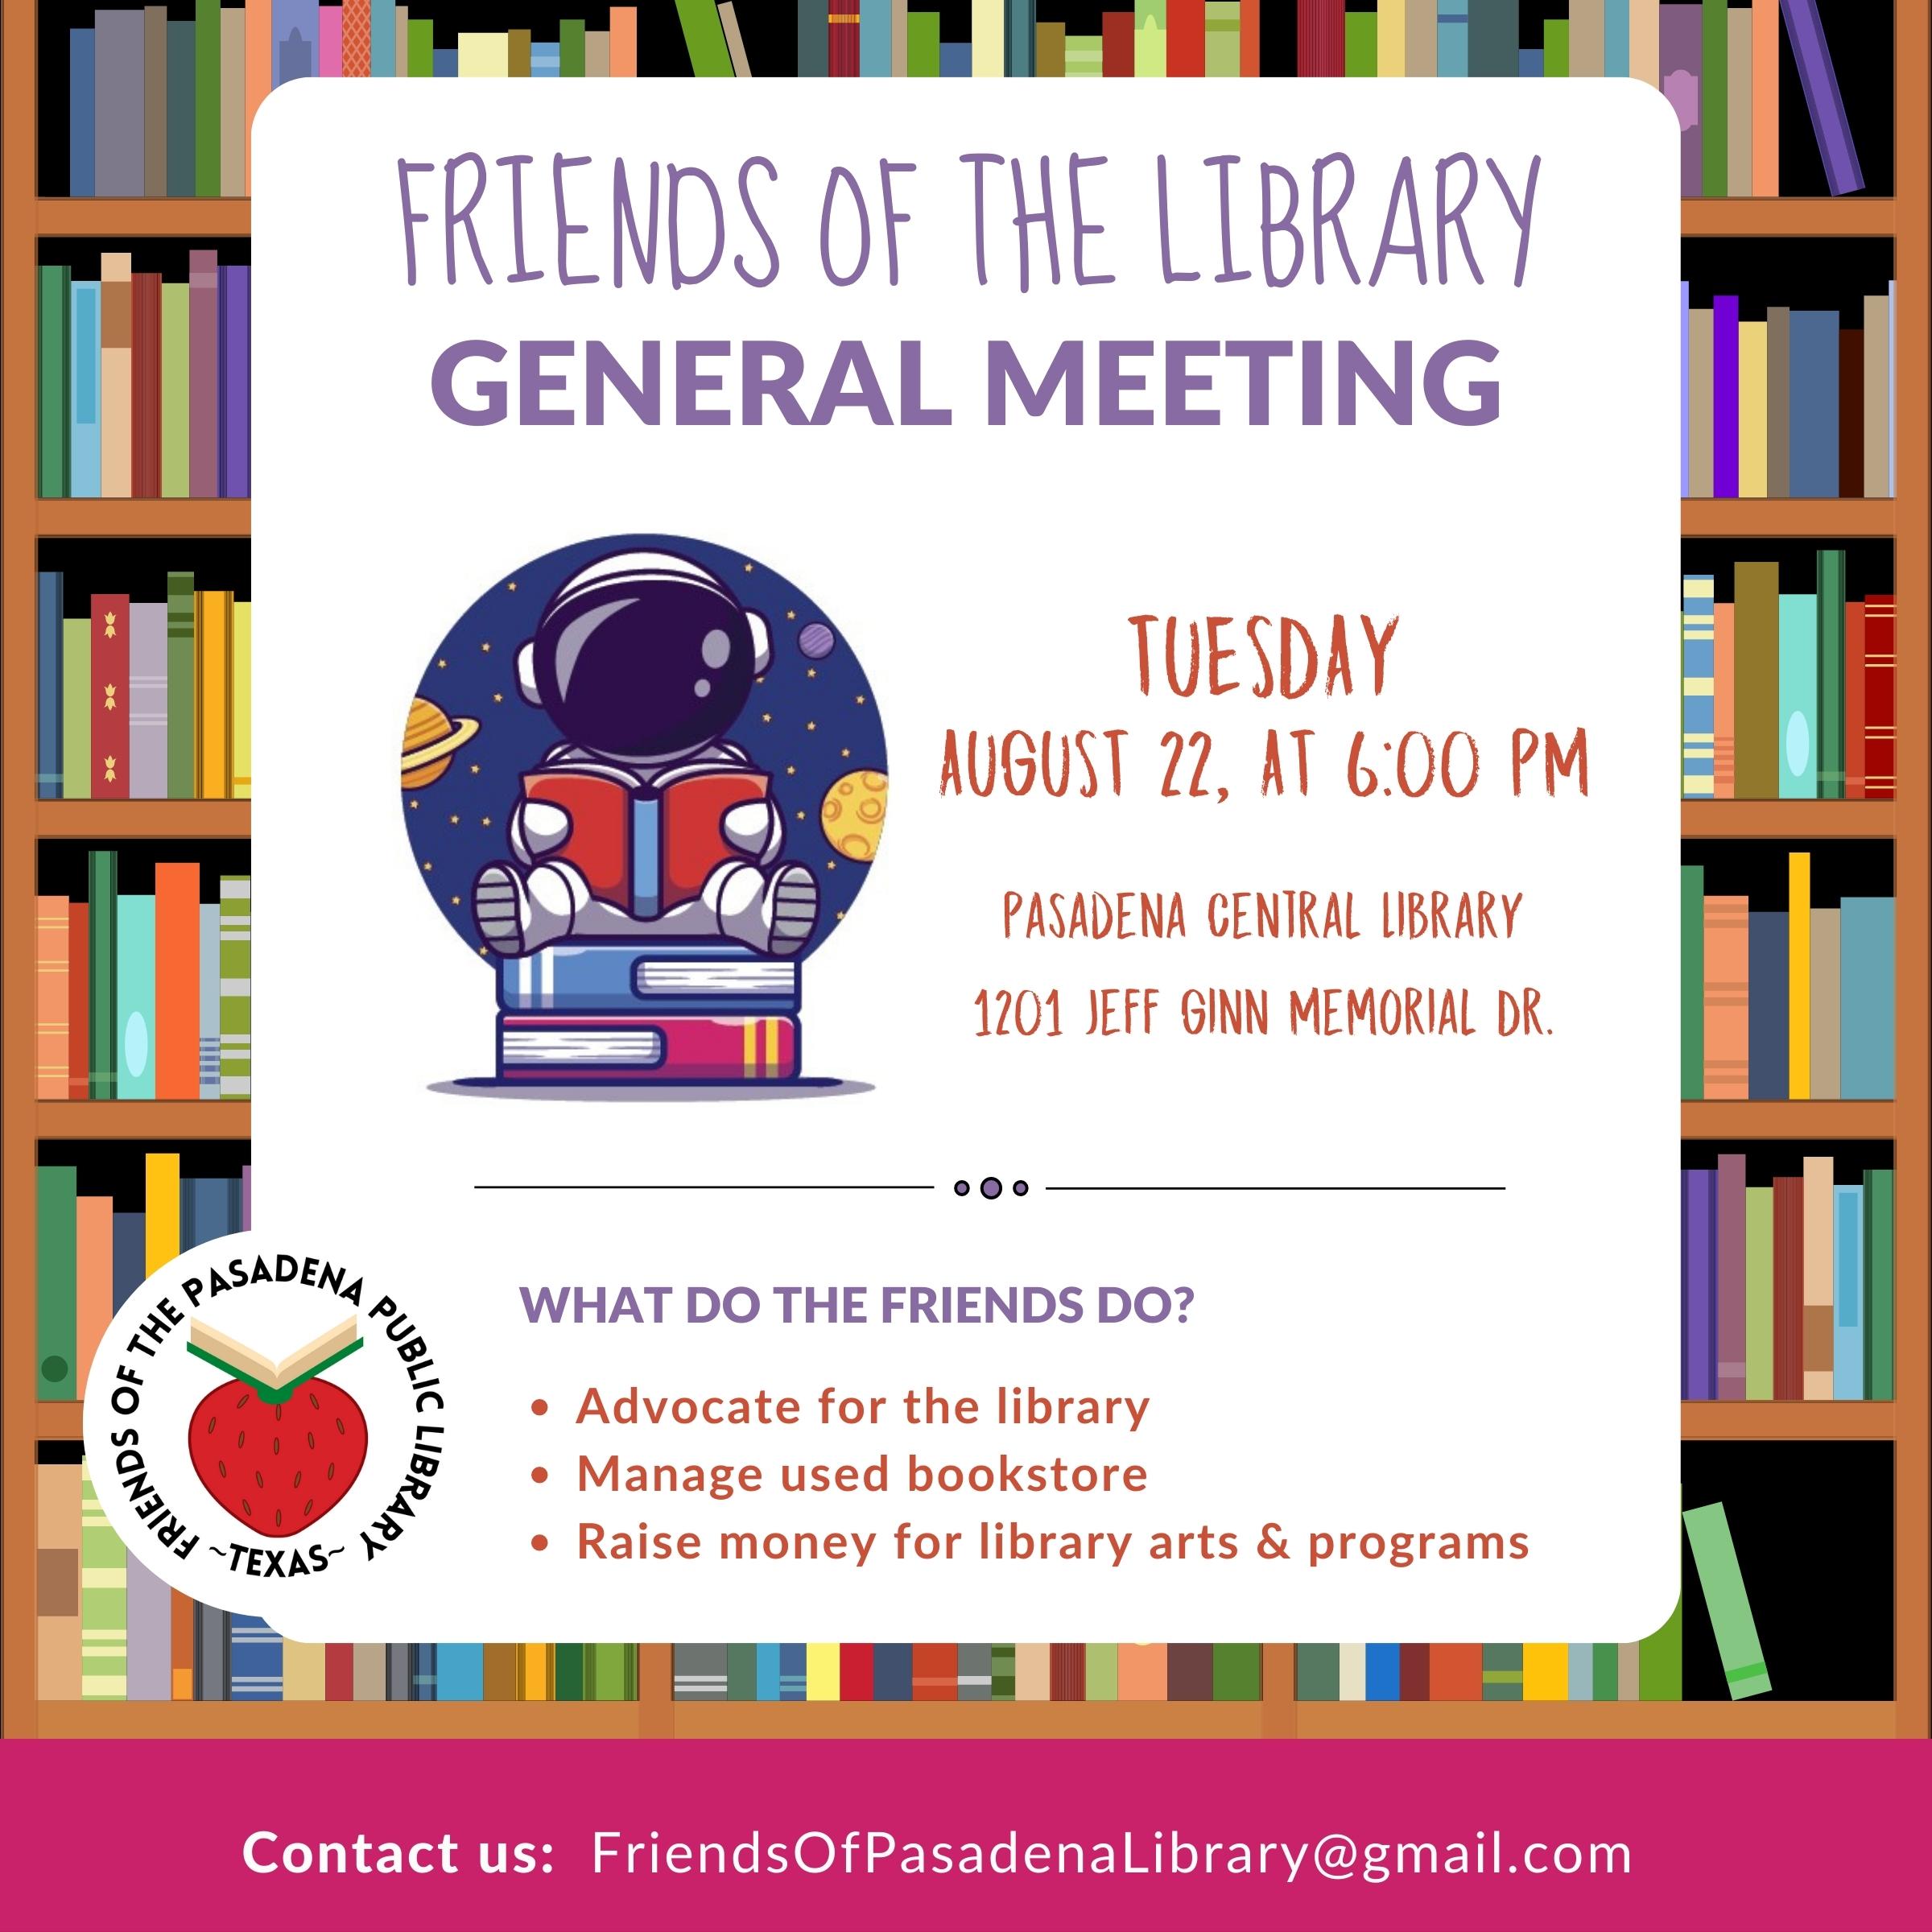 Friends of the Library General Meeting